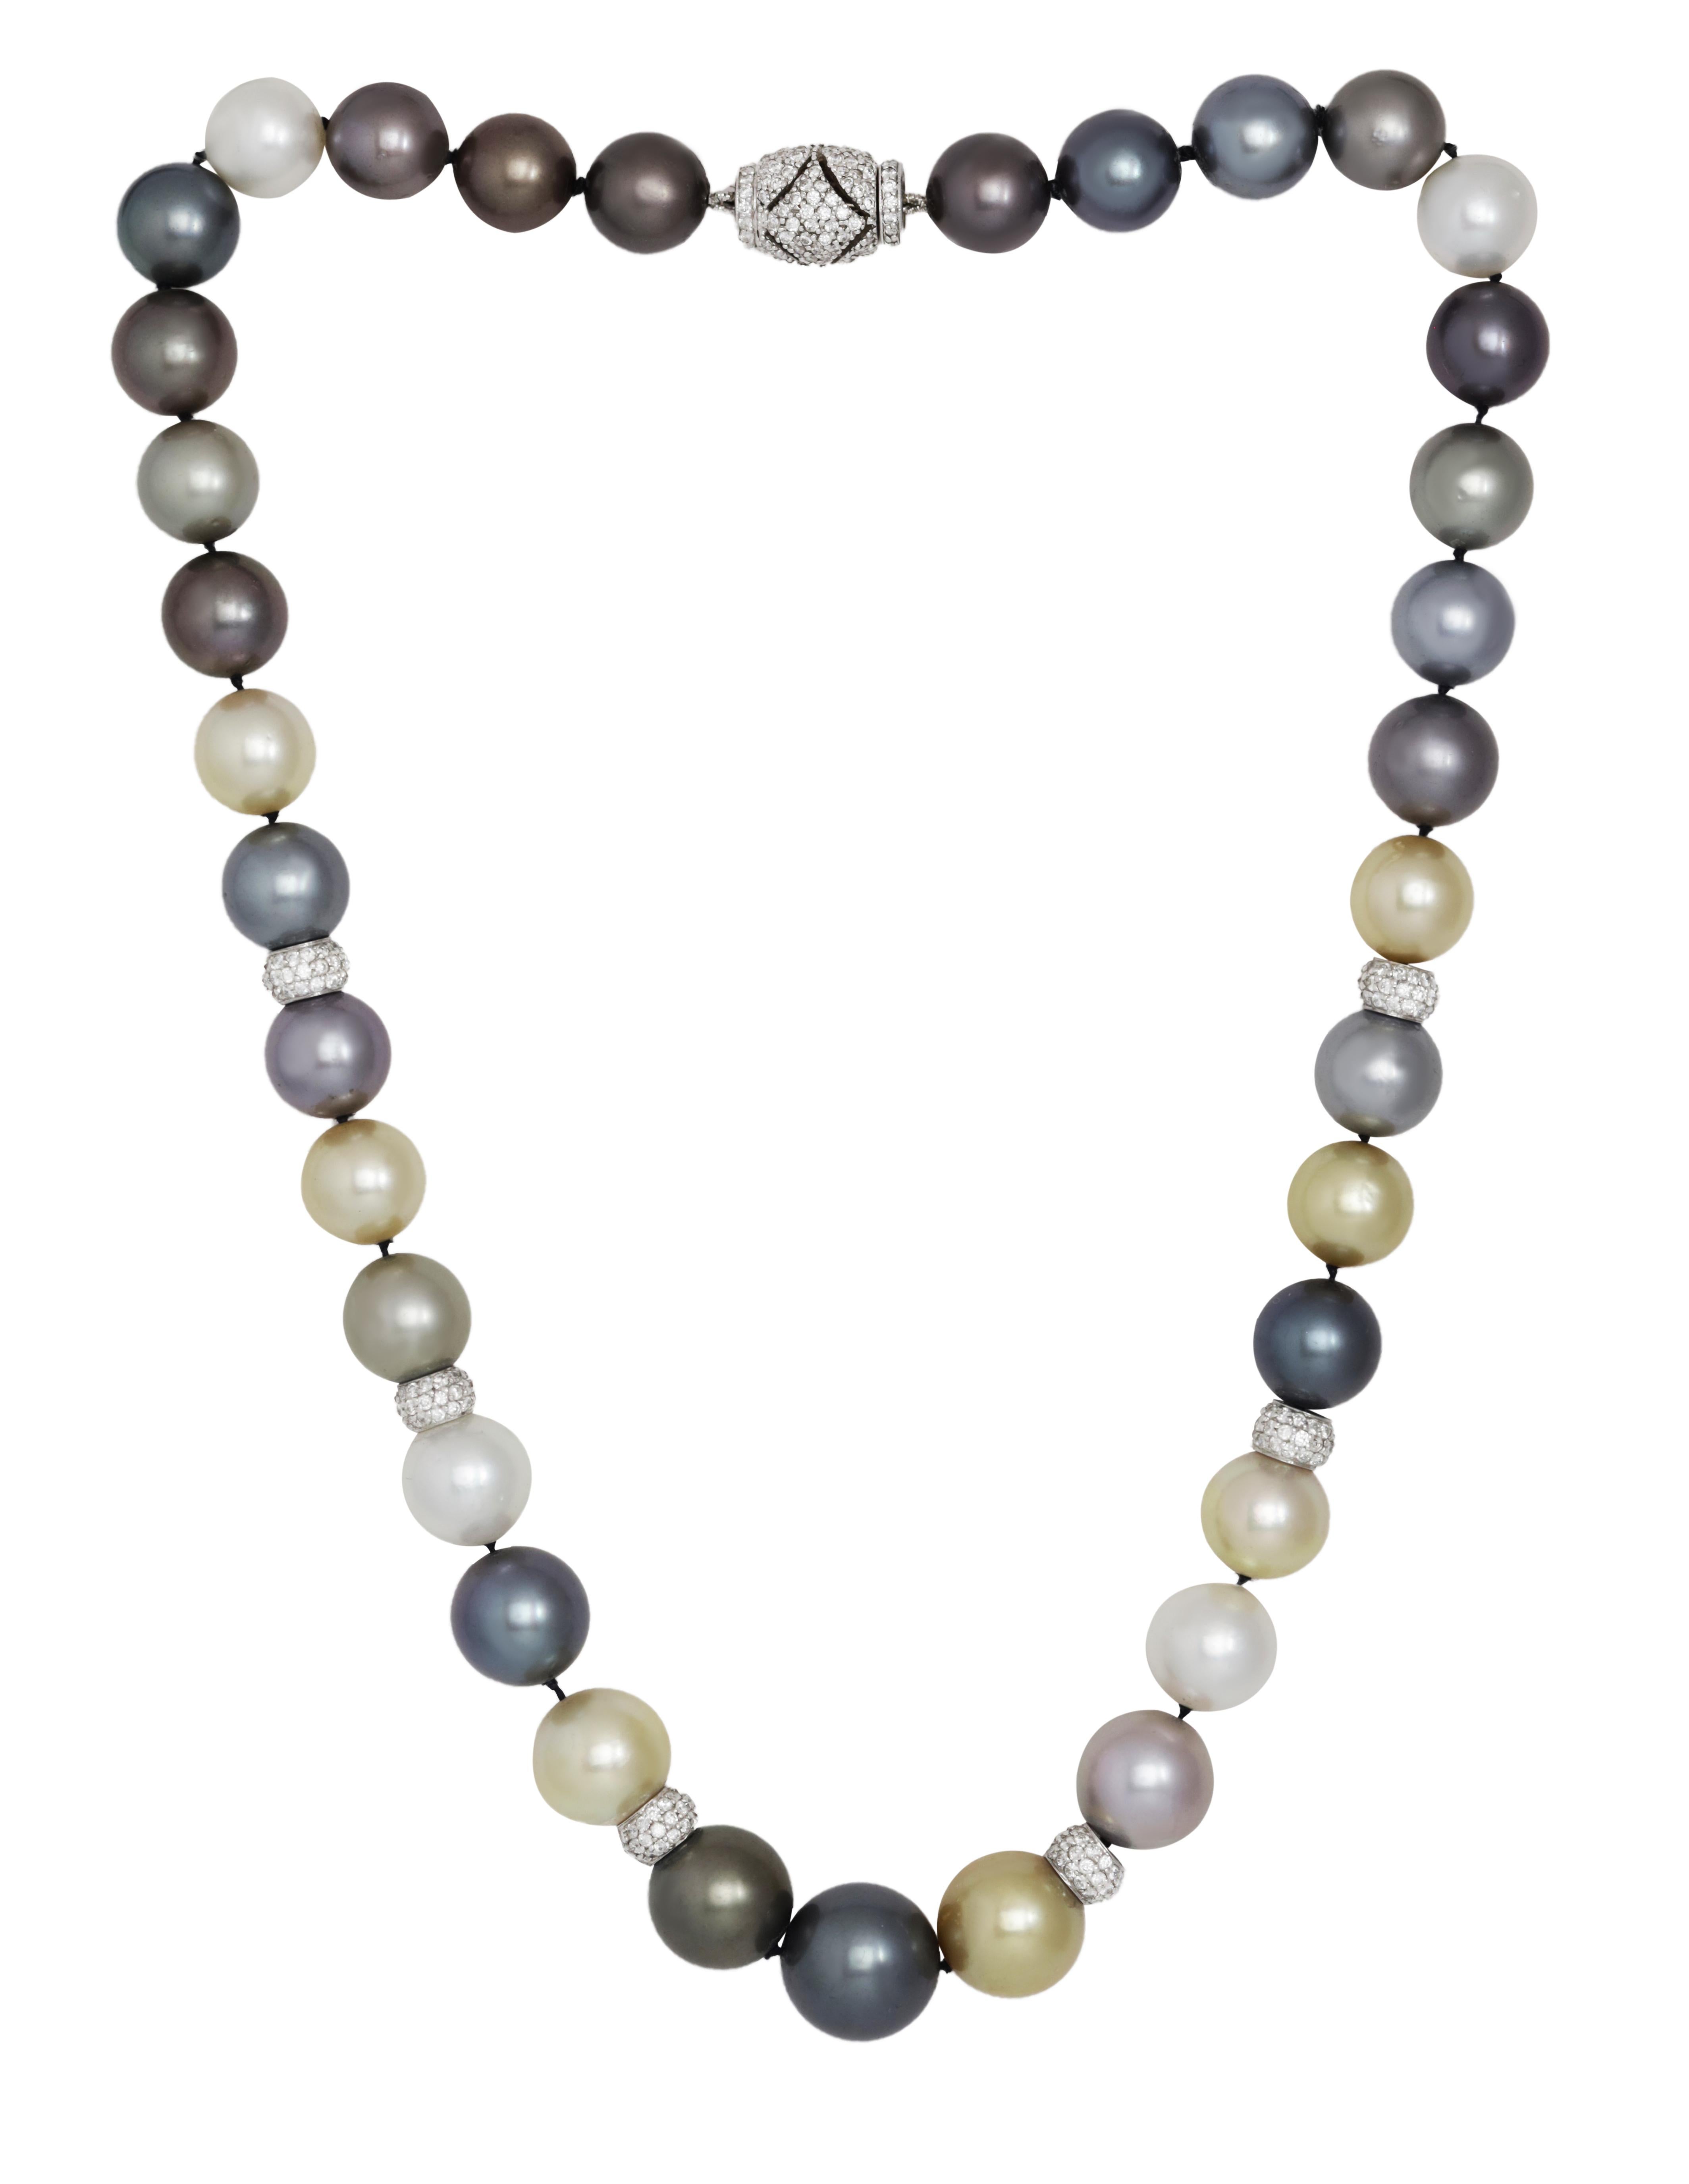 Modern Diana M. Diamond pearl necklace adorned with 10-14 mm Tahitian south sea pearls  For Sale